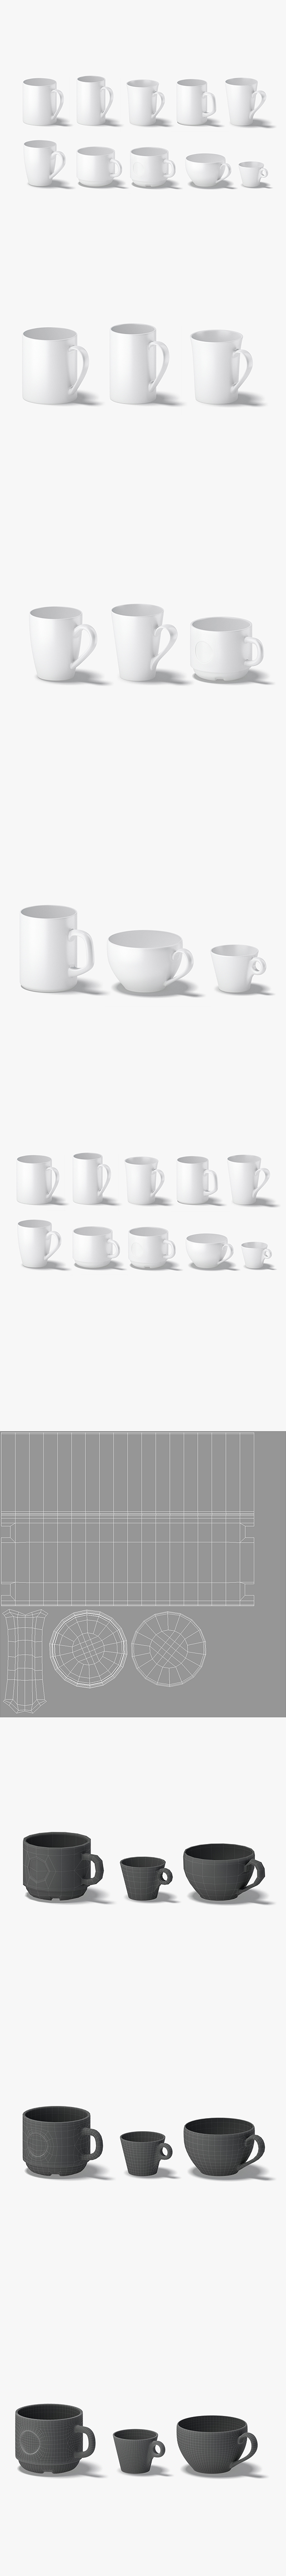 10 Mugs Shapes - white ceramic cups with different forms and sizes